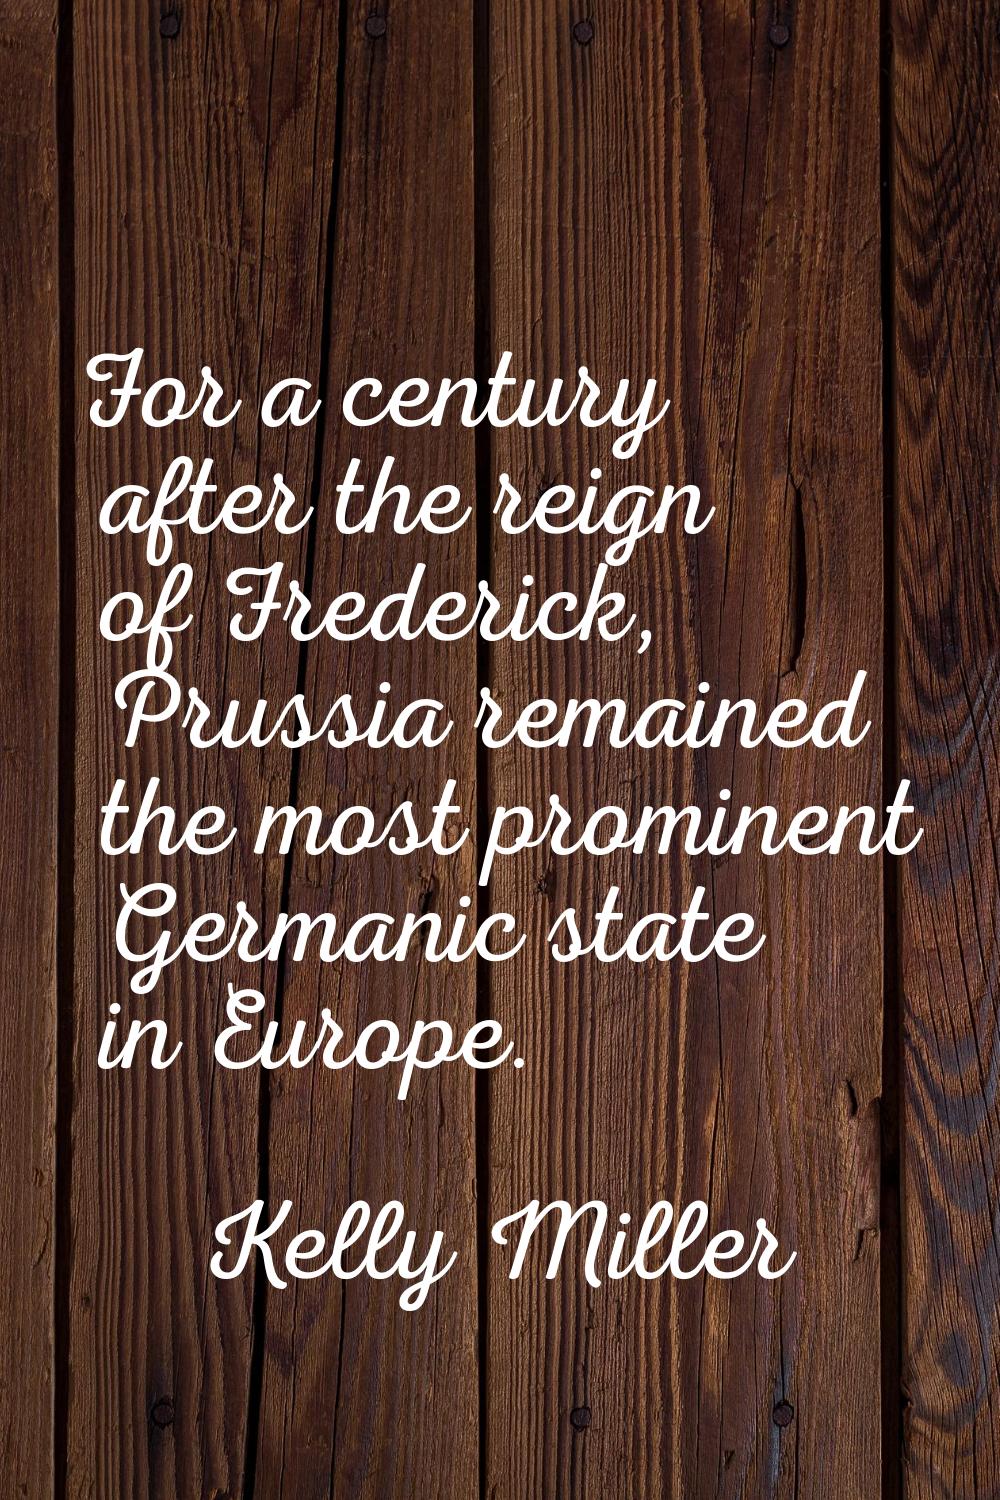 For a century after the reign of Frederick, Prussia remained the most prominent Germanic state in E